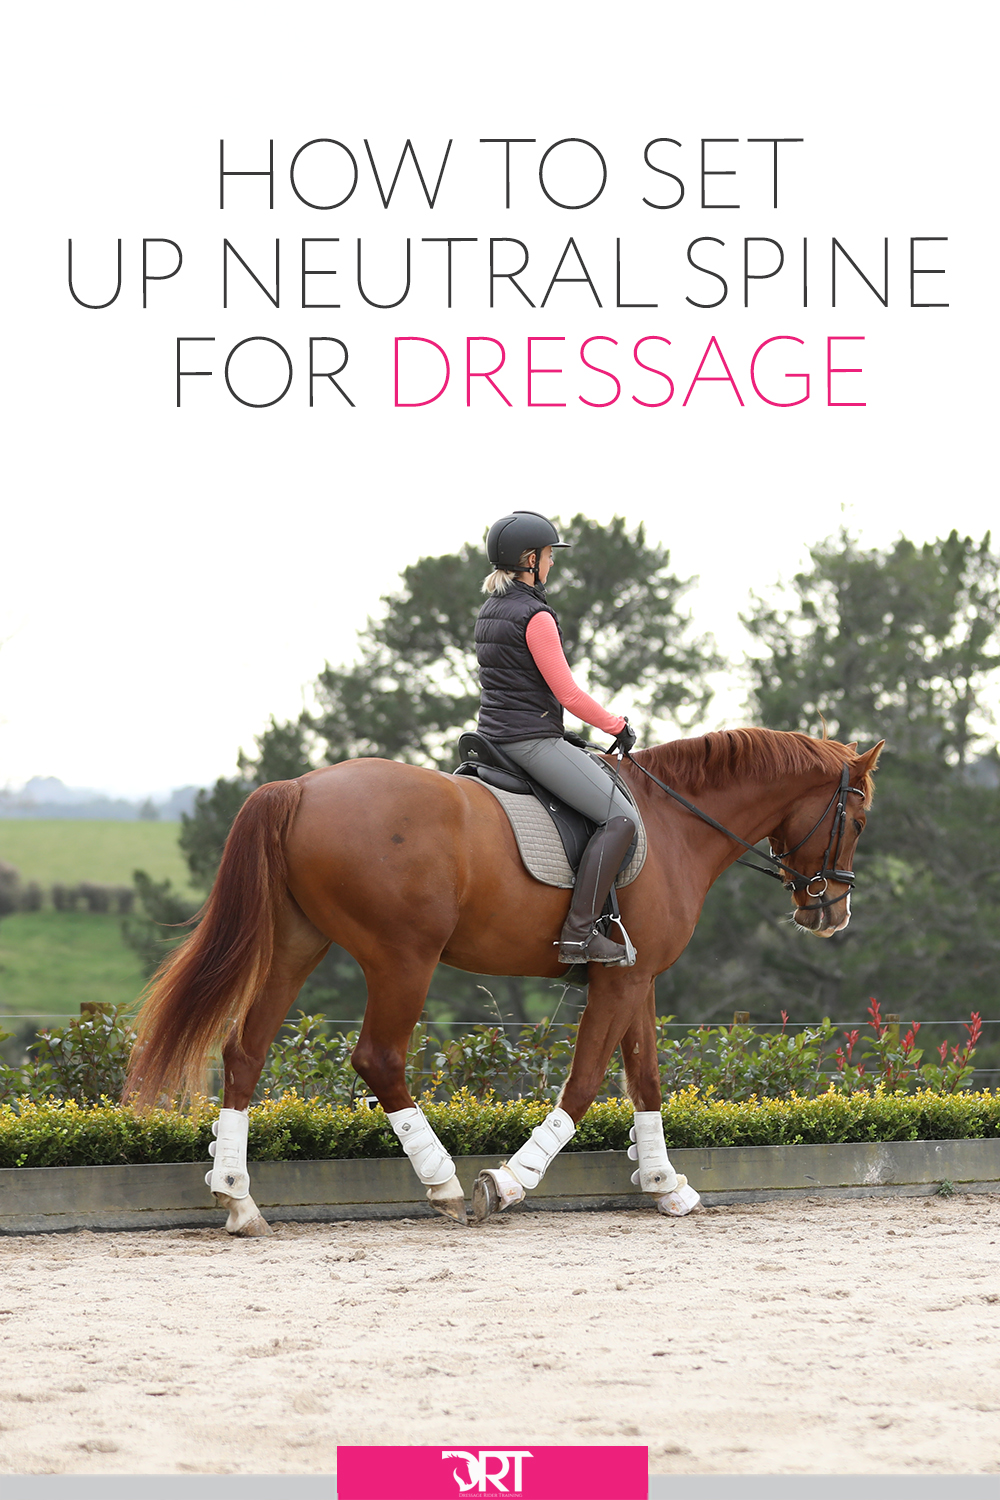 Neutral Spine For Dressage Riders - How To Set Up And Why It Matters